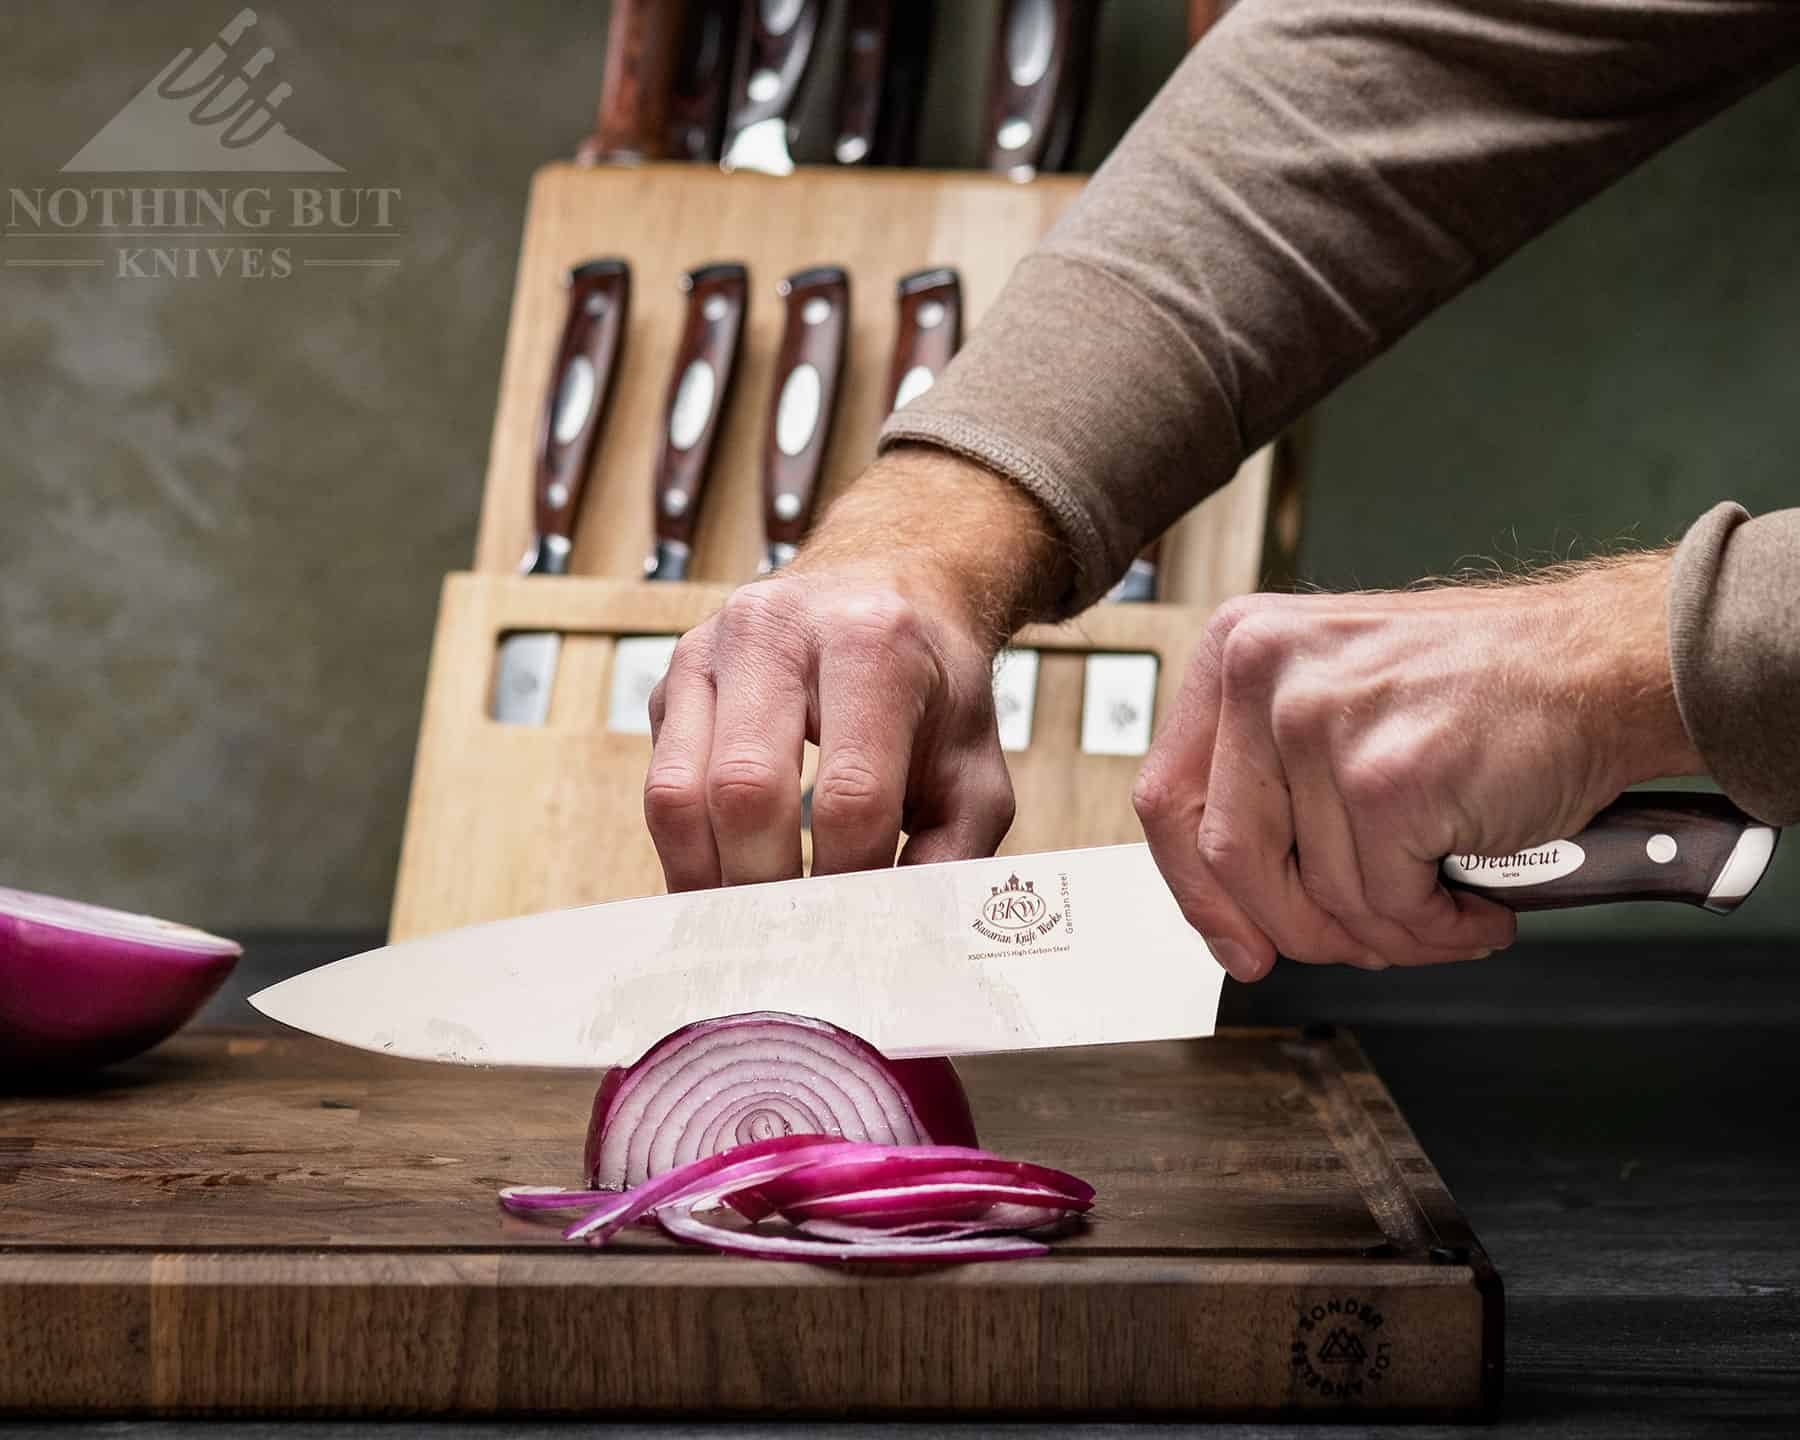 The Bavarian Knife Works 19-Piece knife set ships with a 10 inch chef knife rather than an 8 inch chef knife. 